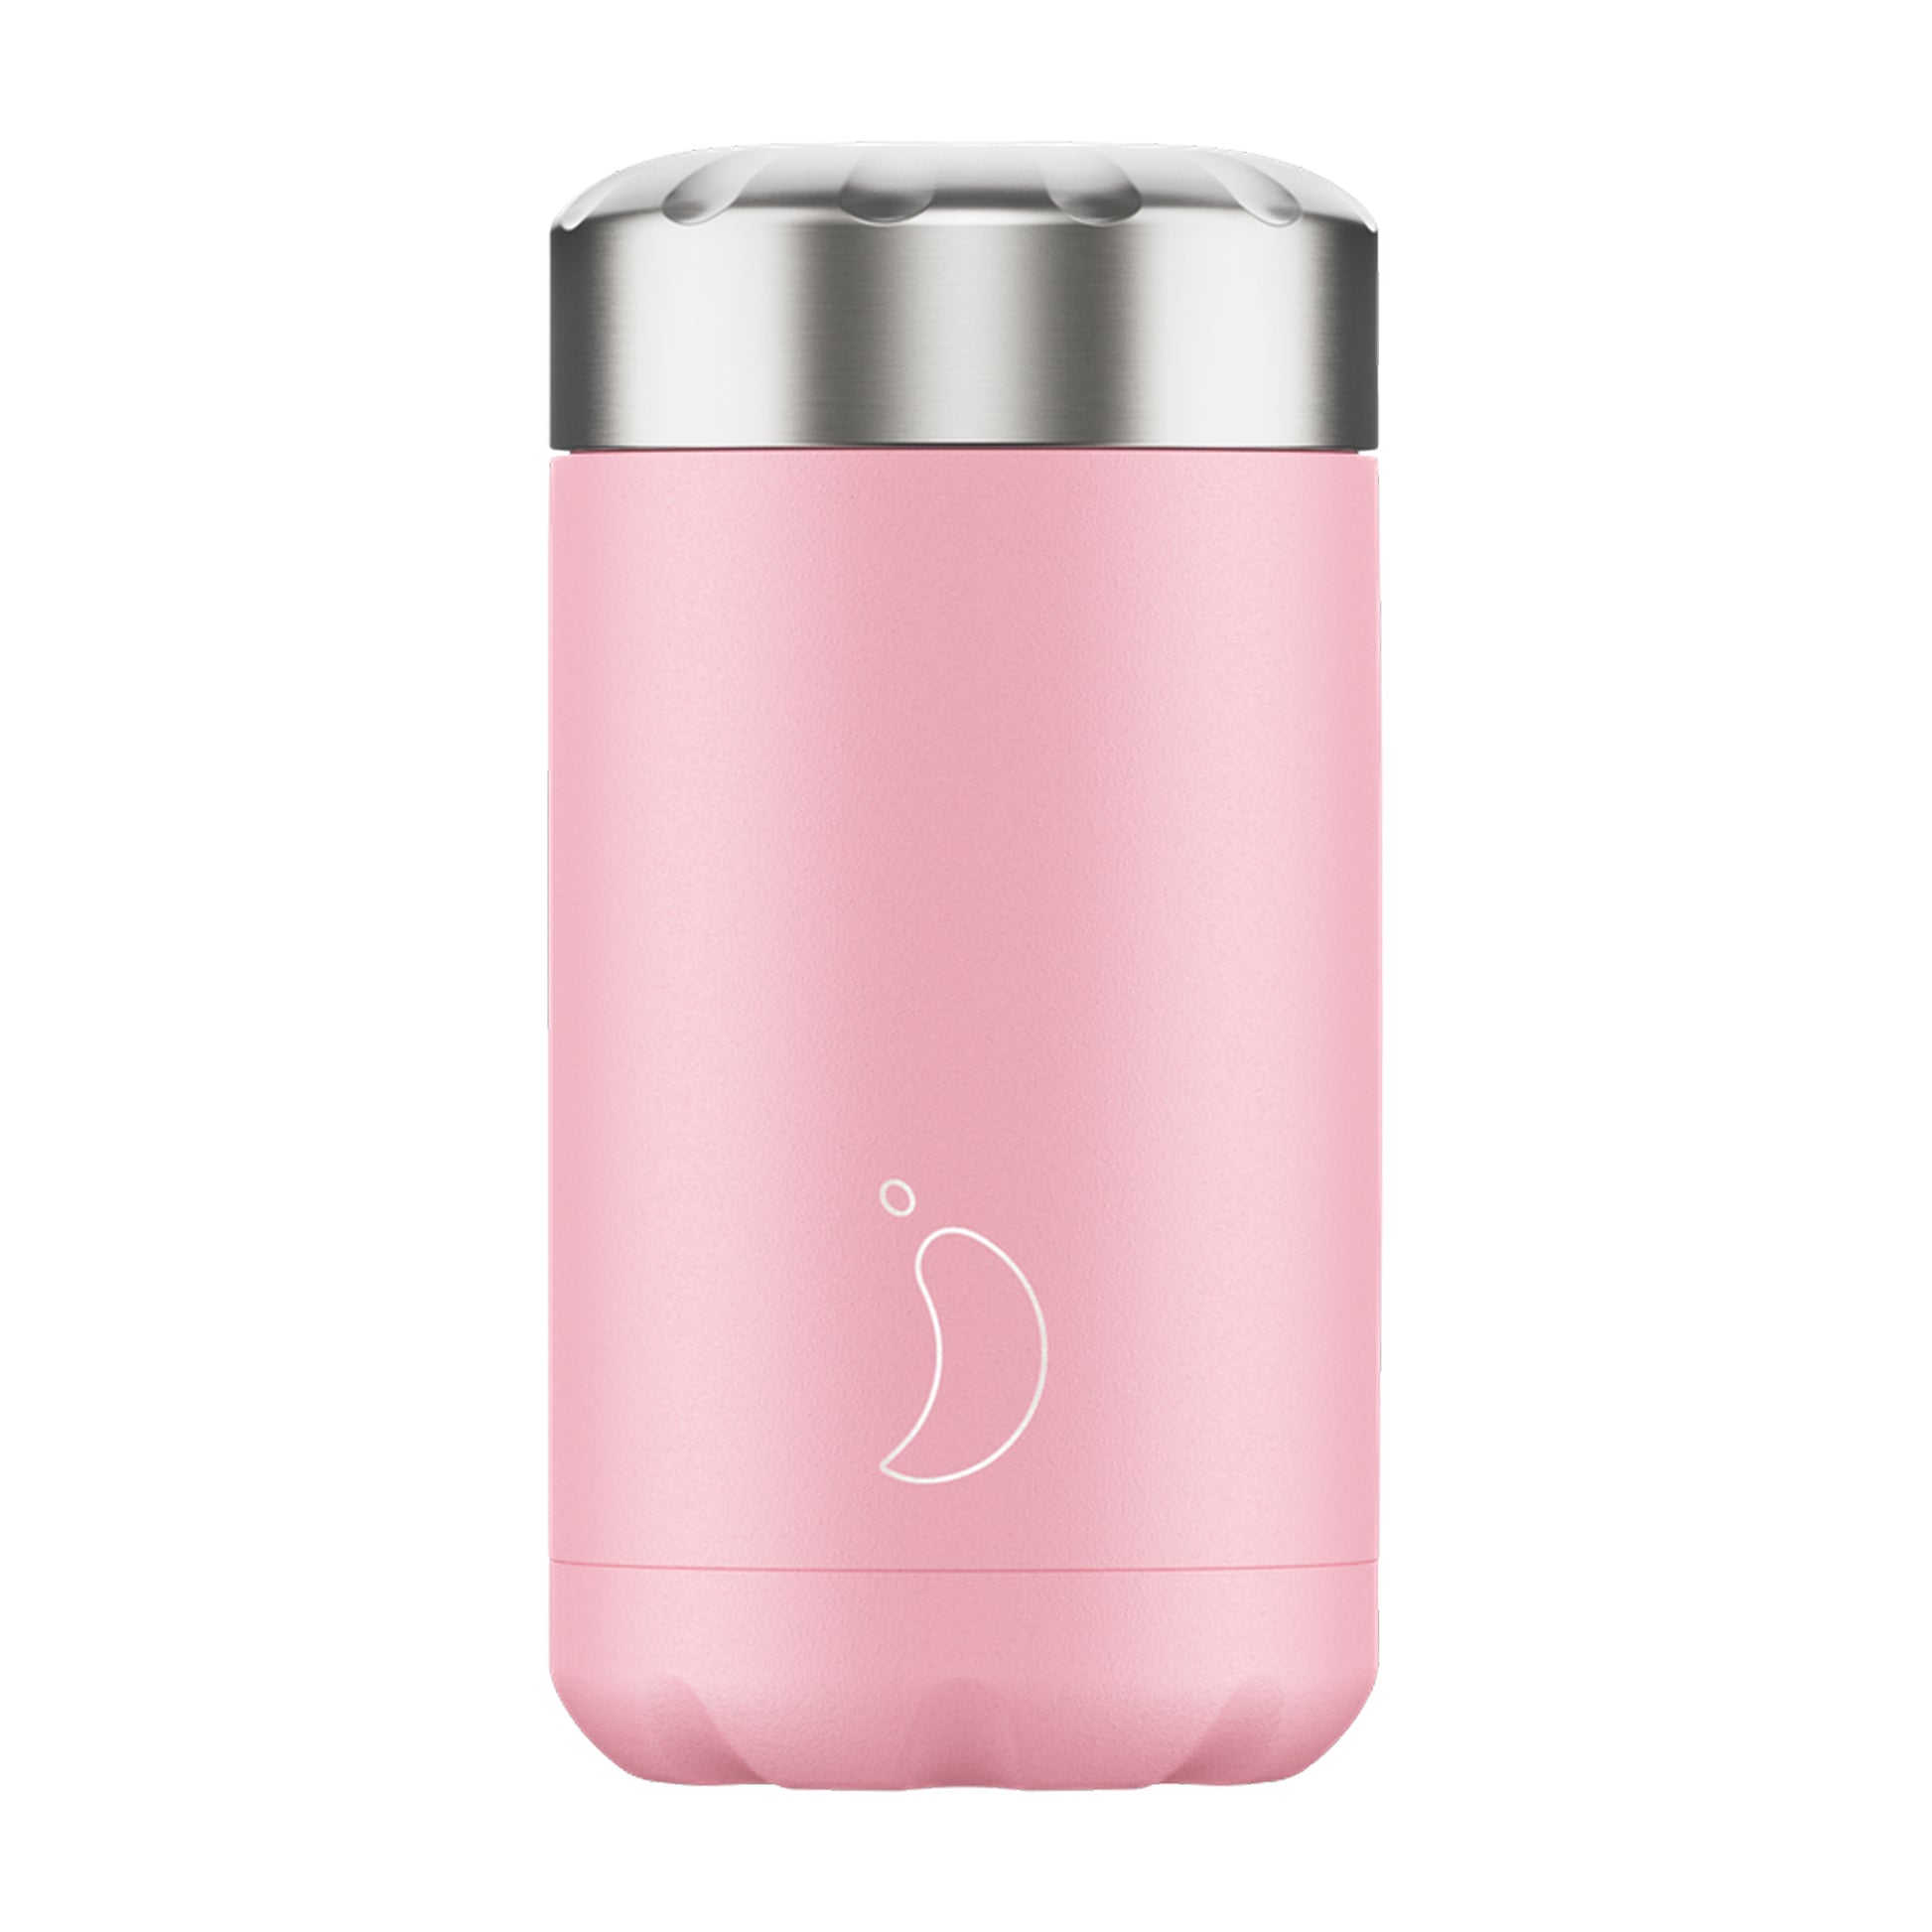 A pastel pink food pot with stainless steel lid and the chilly's logo